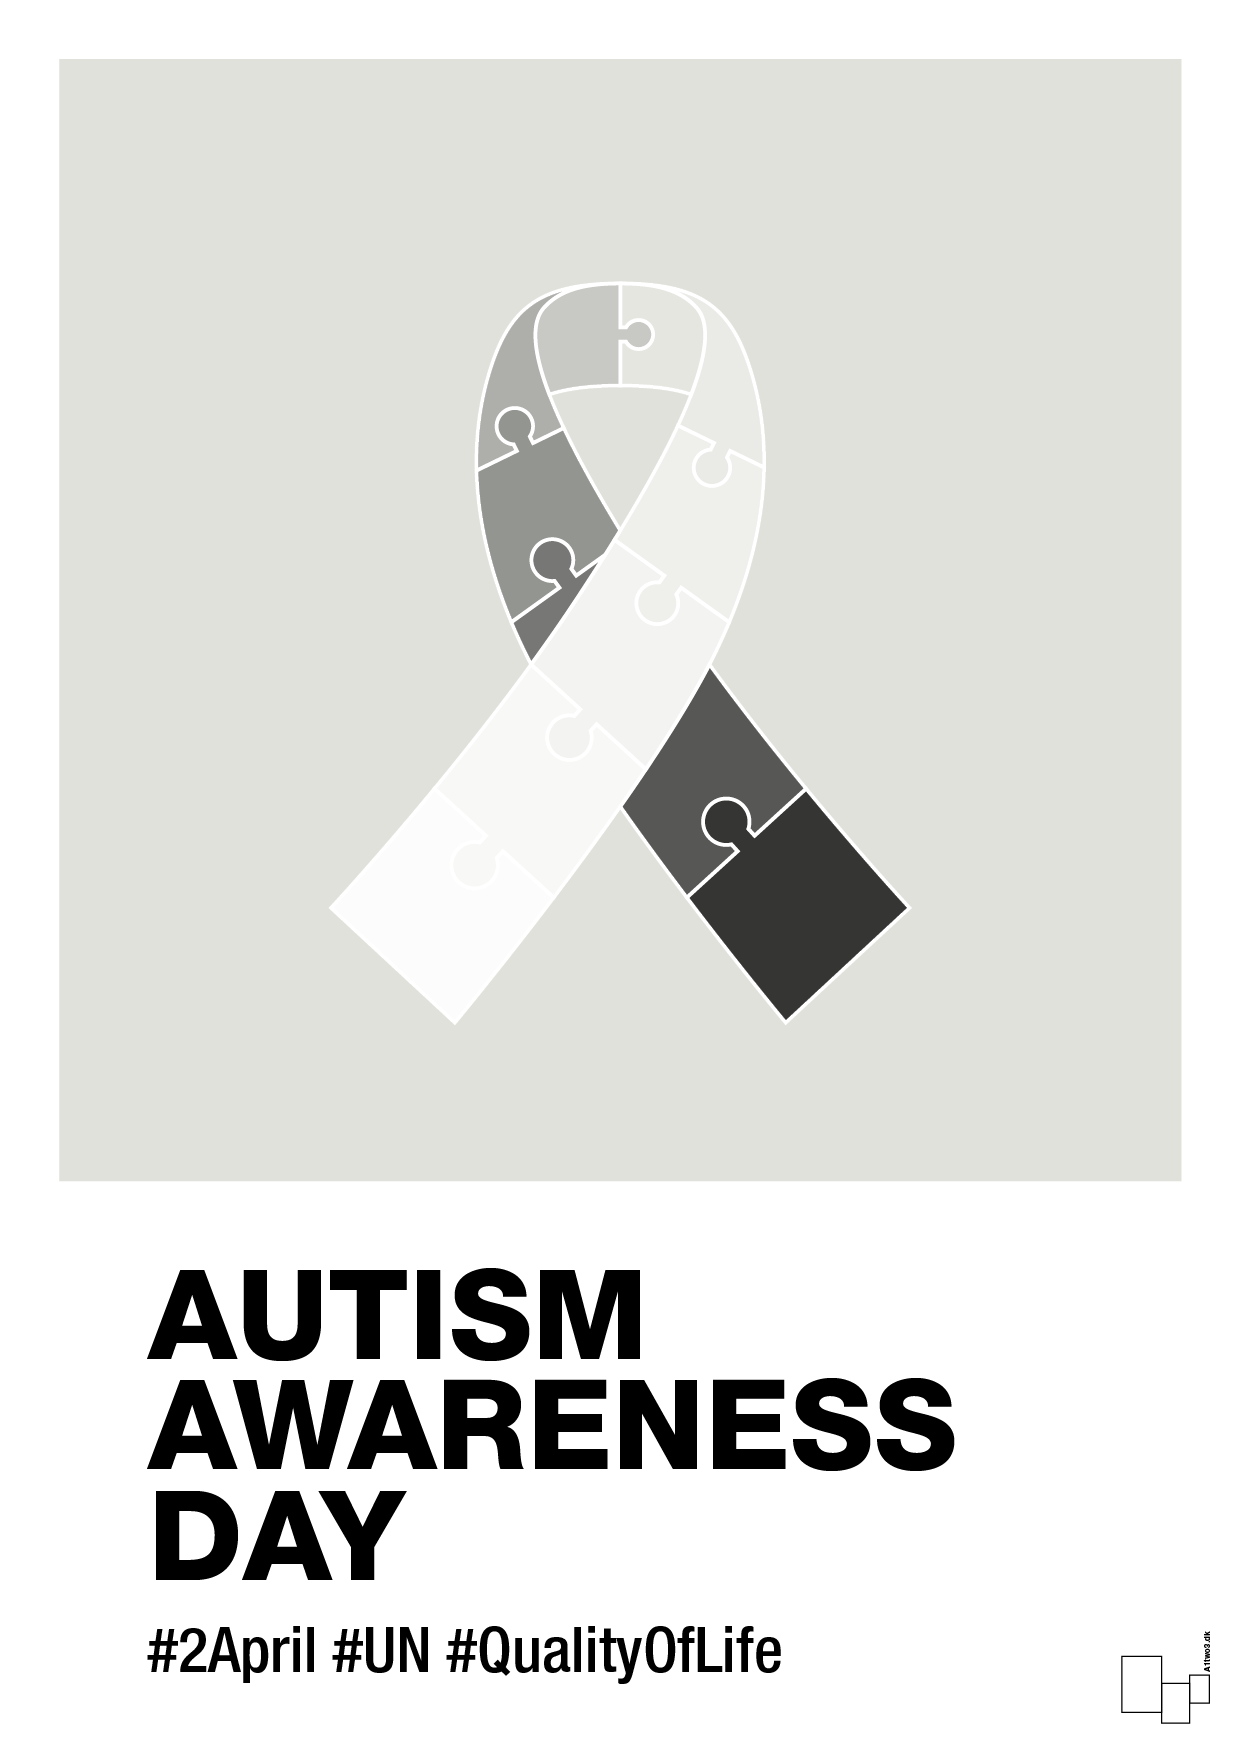 autism awareness day in monocolor - Plakat med Samfund i Painters White